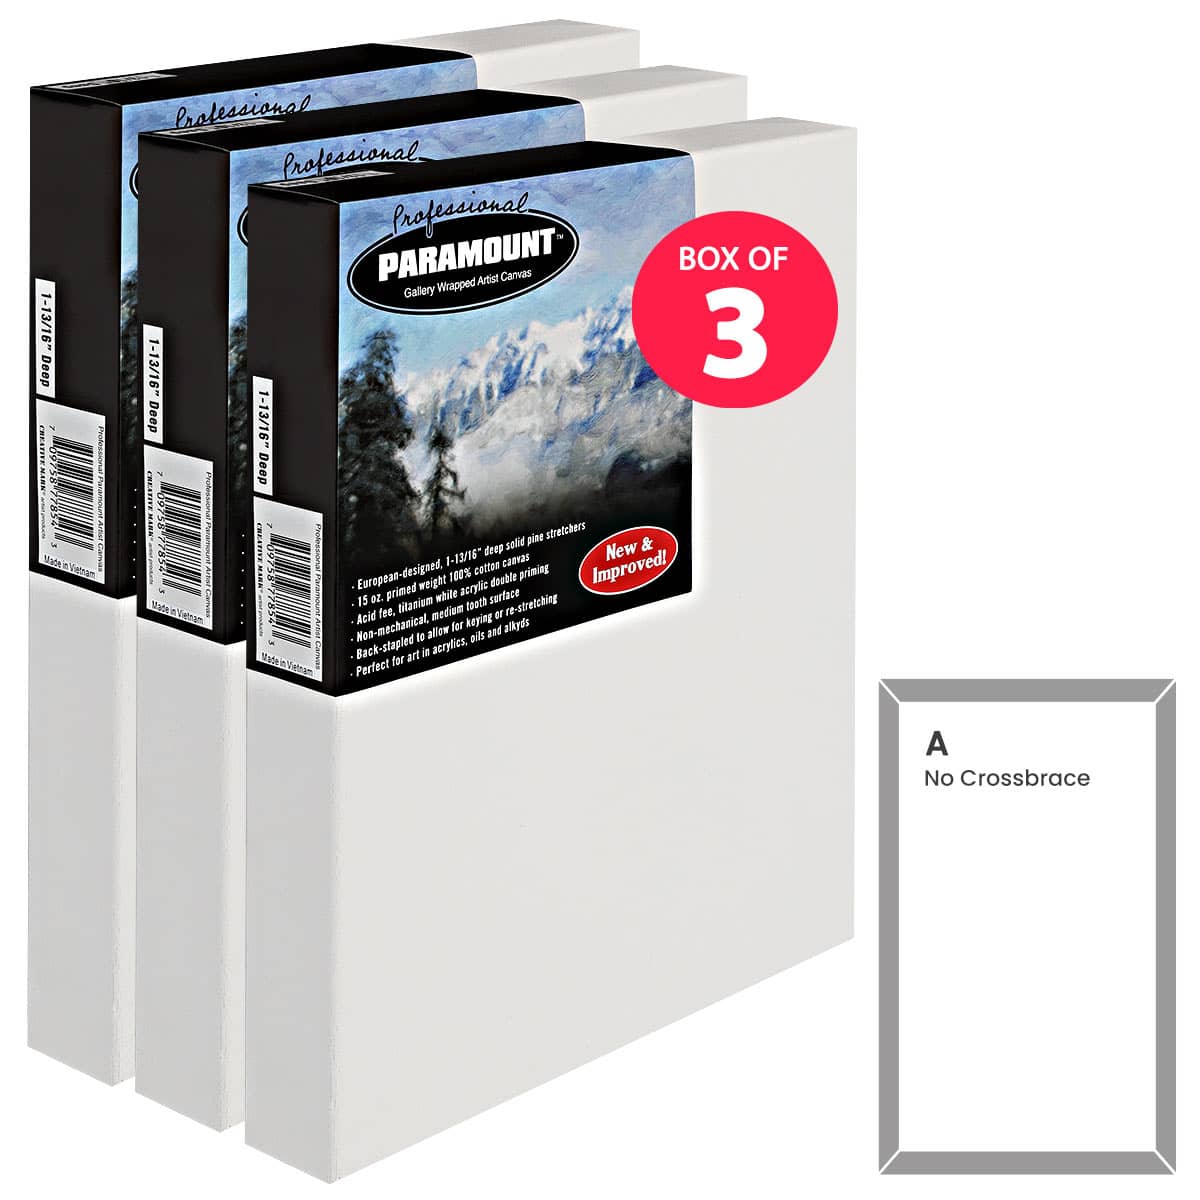 Paramount 1-13/16" Professional Gallery Wrap Canvas 11x14" Box of 3